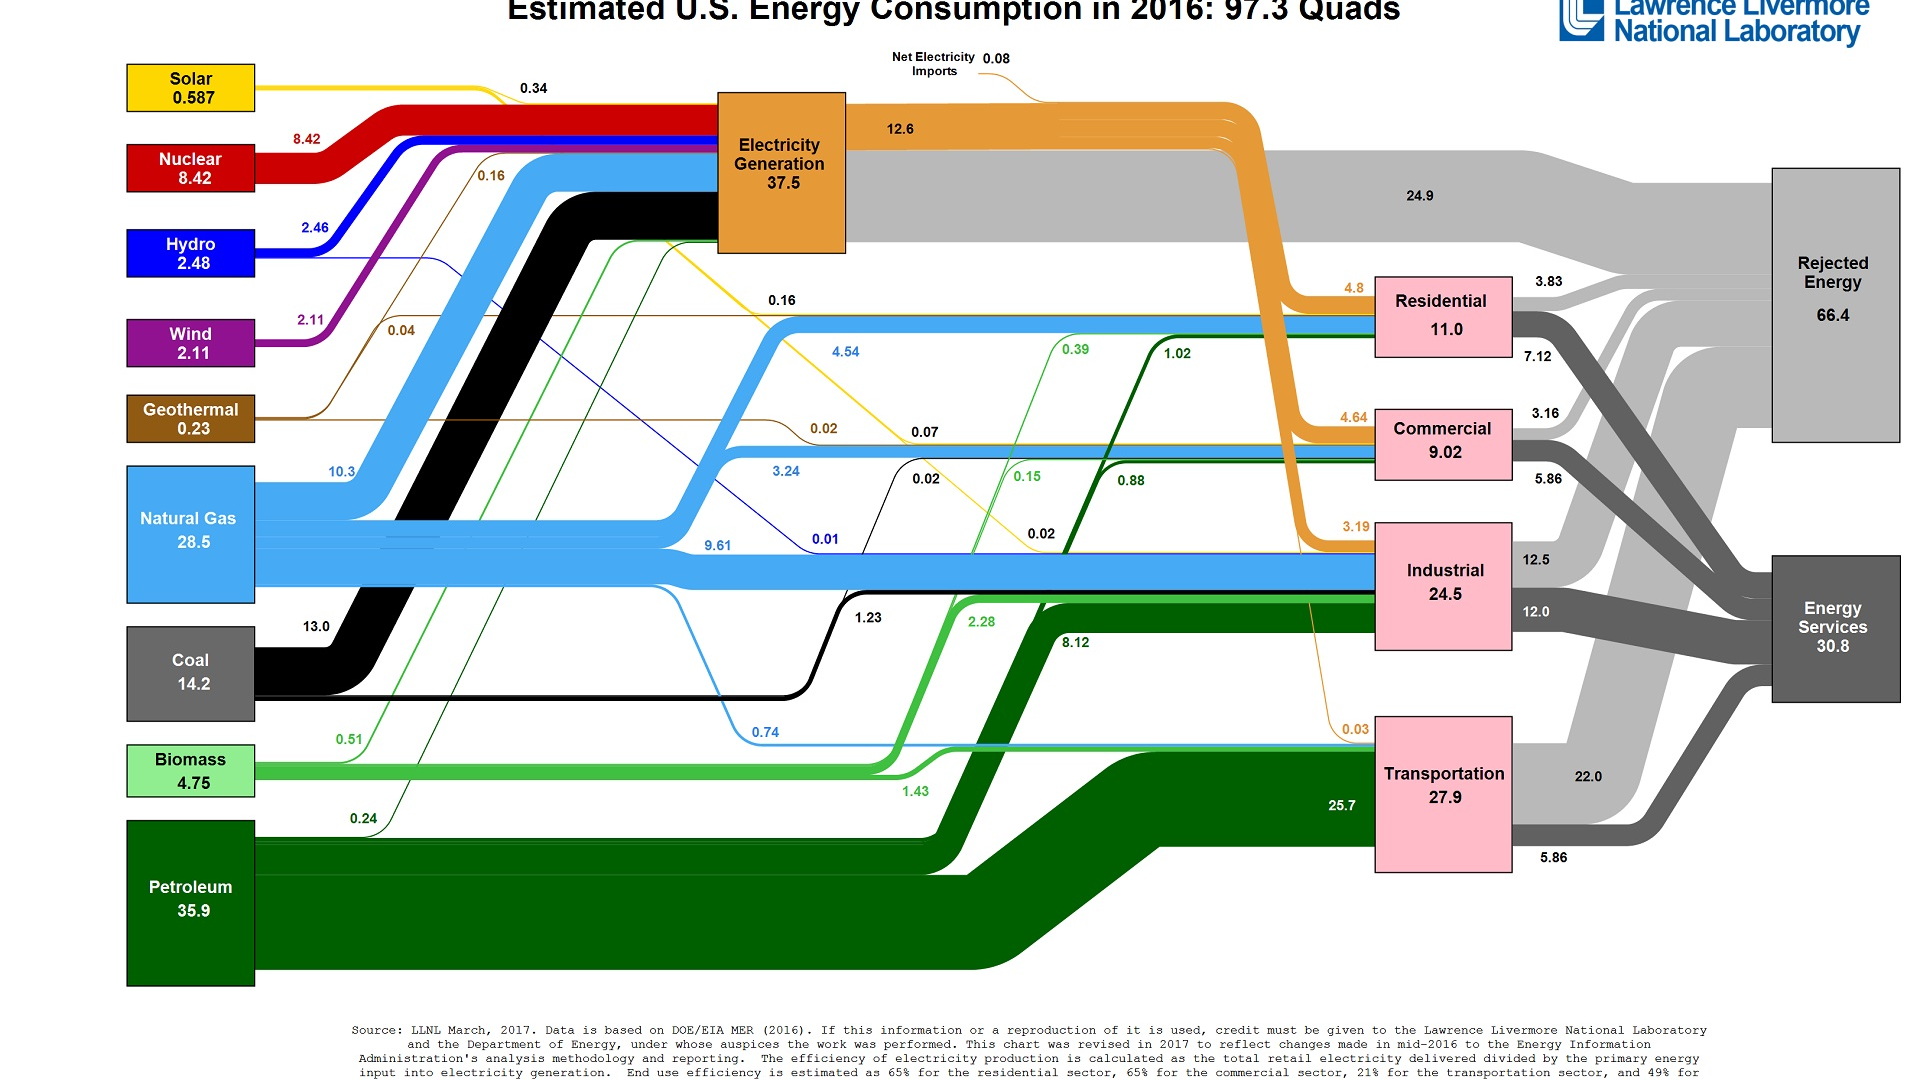 Estimated U.S. energy consumption in 2016  [graphic: Lawrence Livermore National Laboratory]